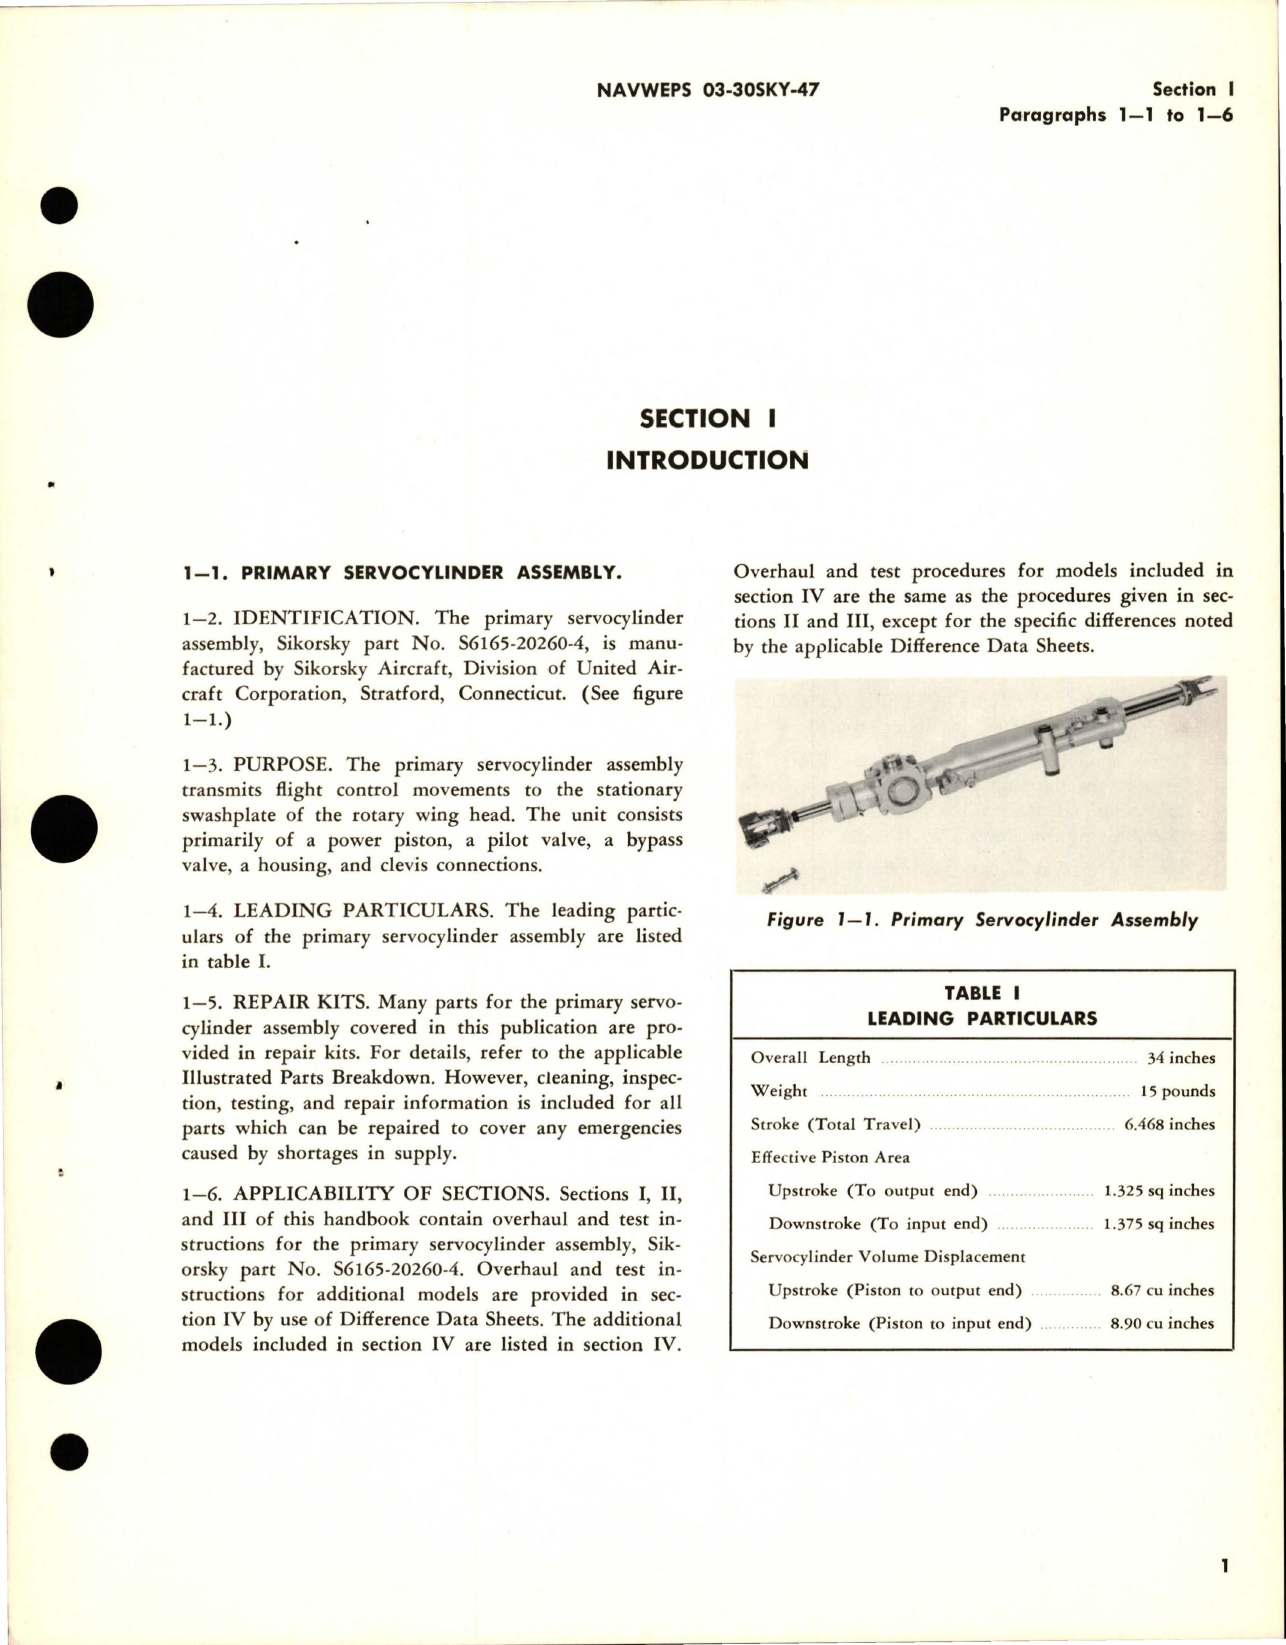 Sample page 5 from AirCorps Library document: Overhaul Instructions for Primary Servocylinder Assembly - Parts S6165-20260-1, S6165-20260-2, S6165-20260-3, and S6165-20260-4